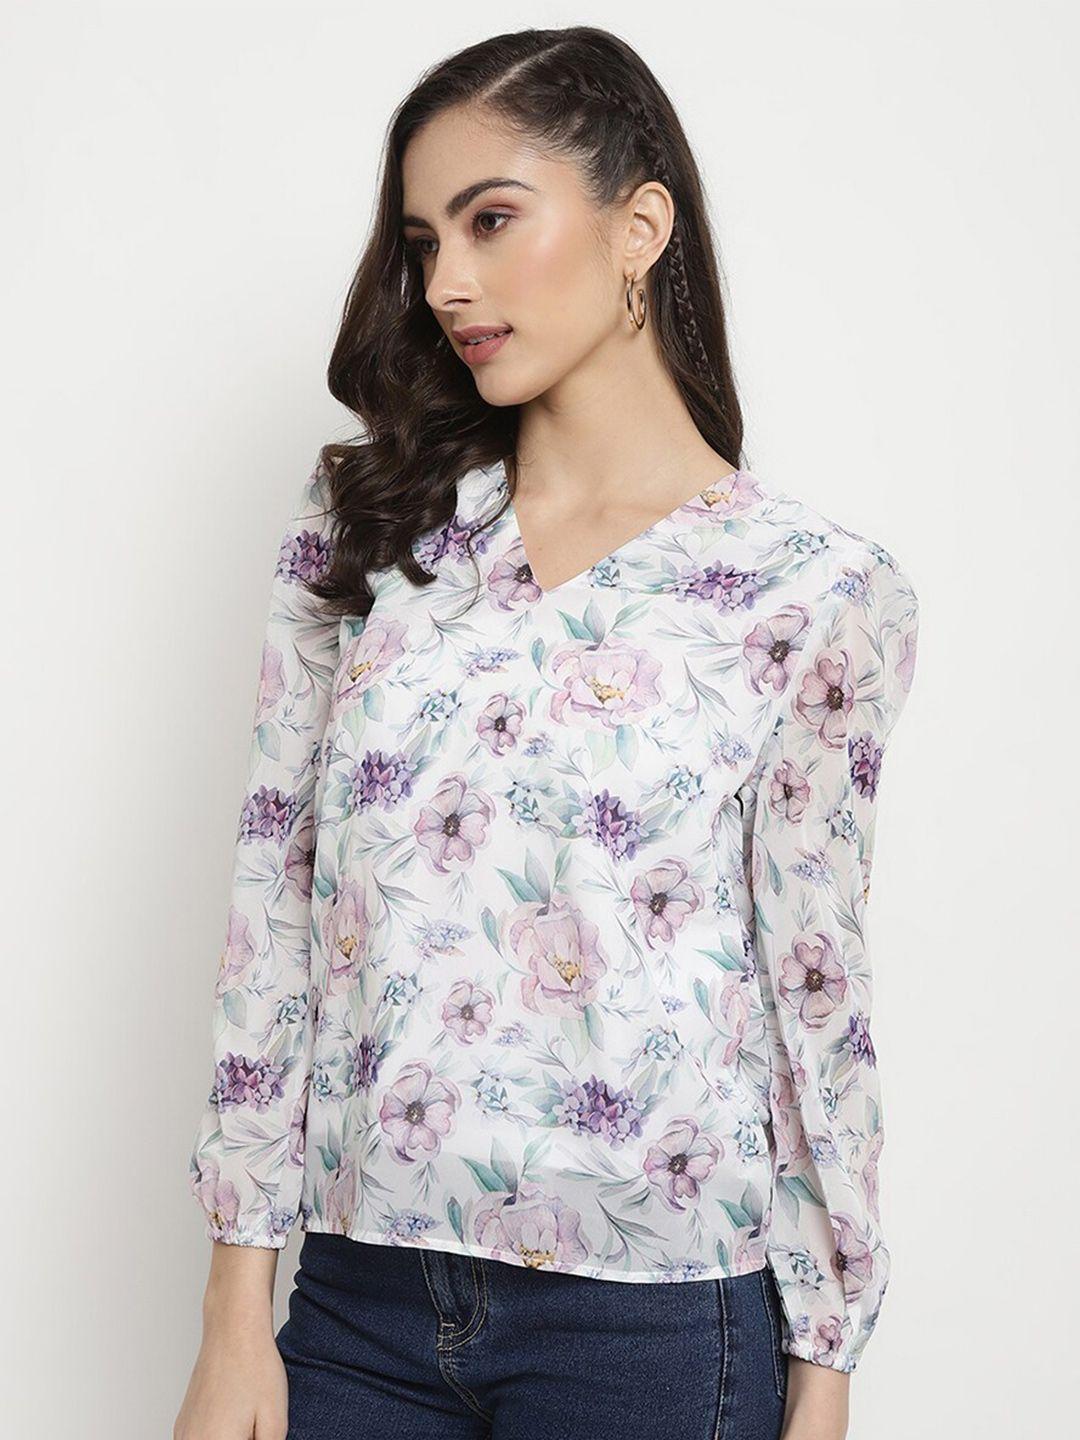 mettle floral print cotton shirt style top